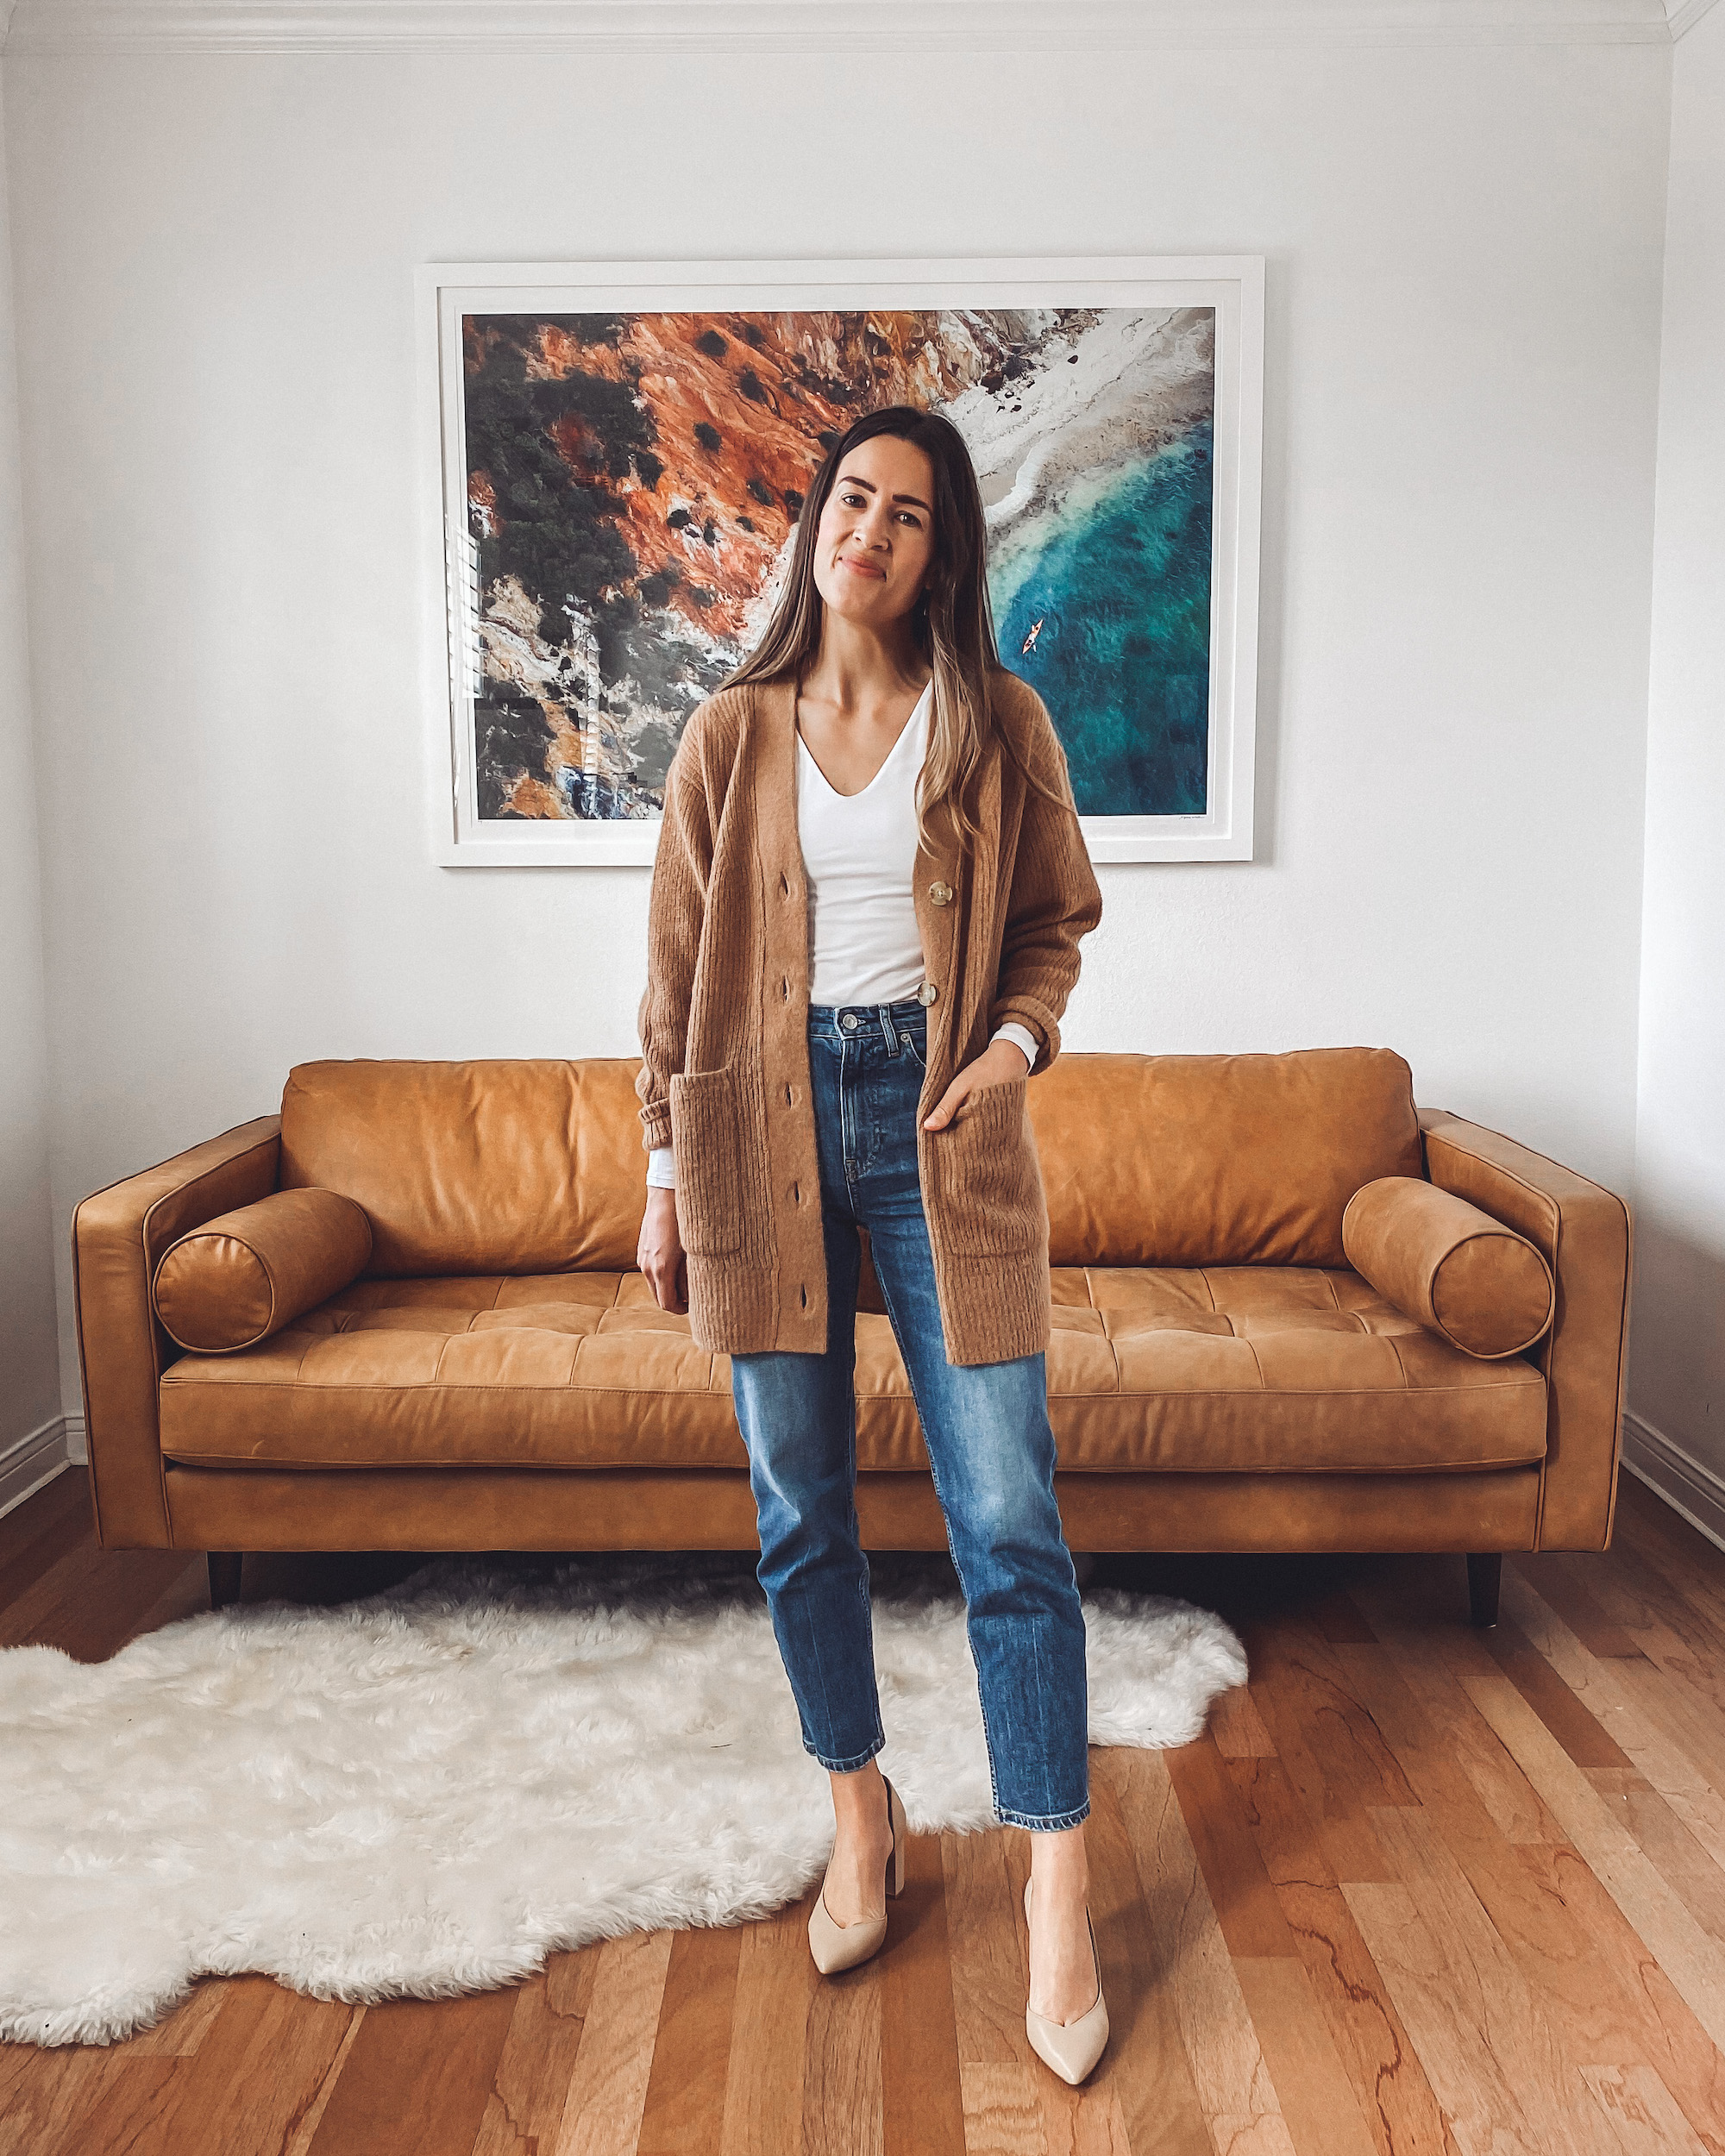 The Most Flattering Jeans - By Natalie Borton - Nesting Story